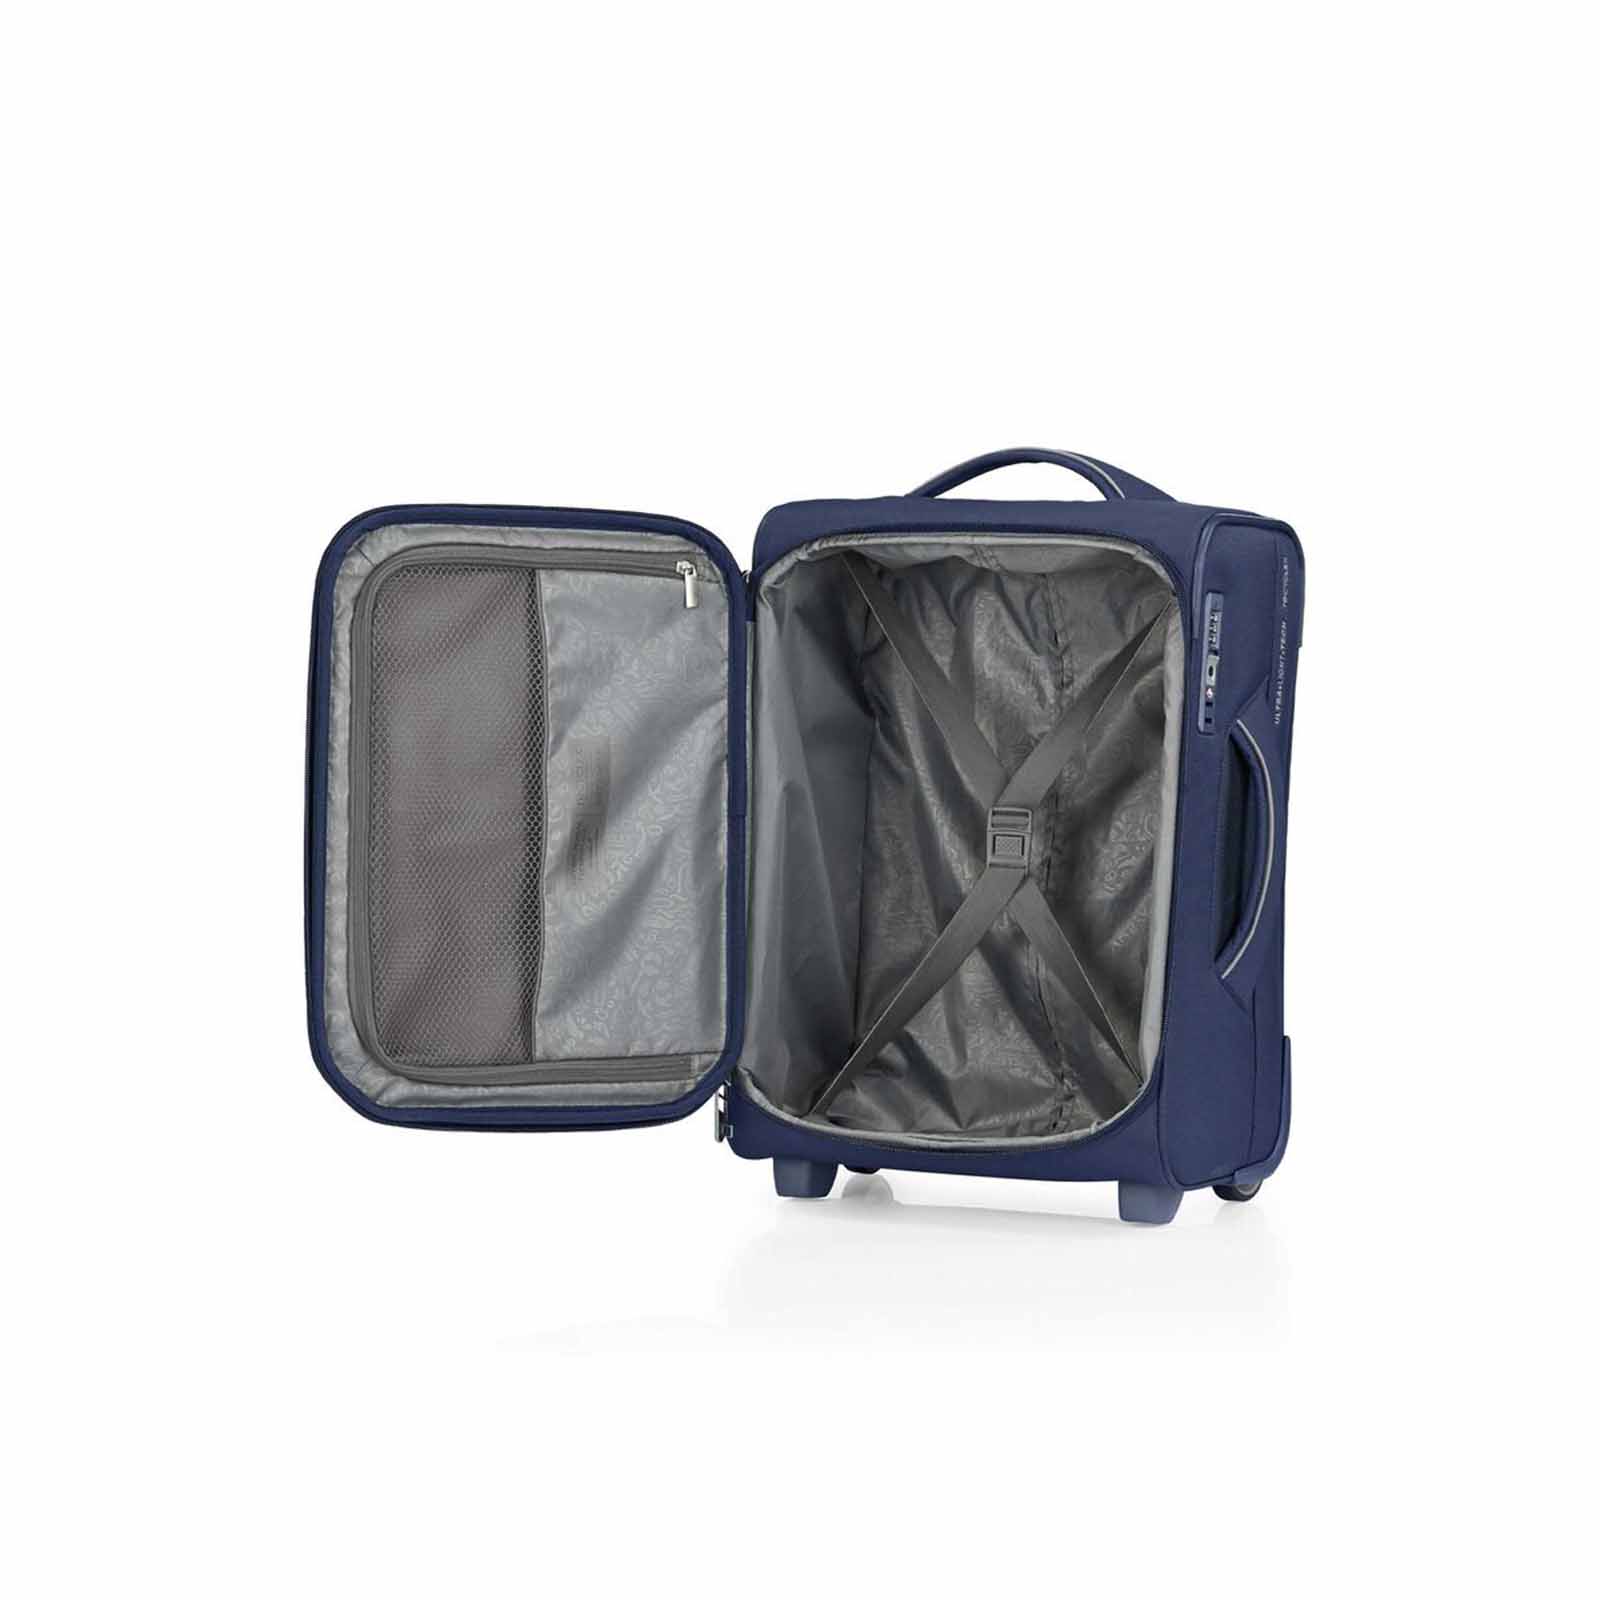 American-Tourister-Applite-4-Eco-50cm-Carry-On-Suitcase-Navy-Open